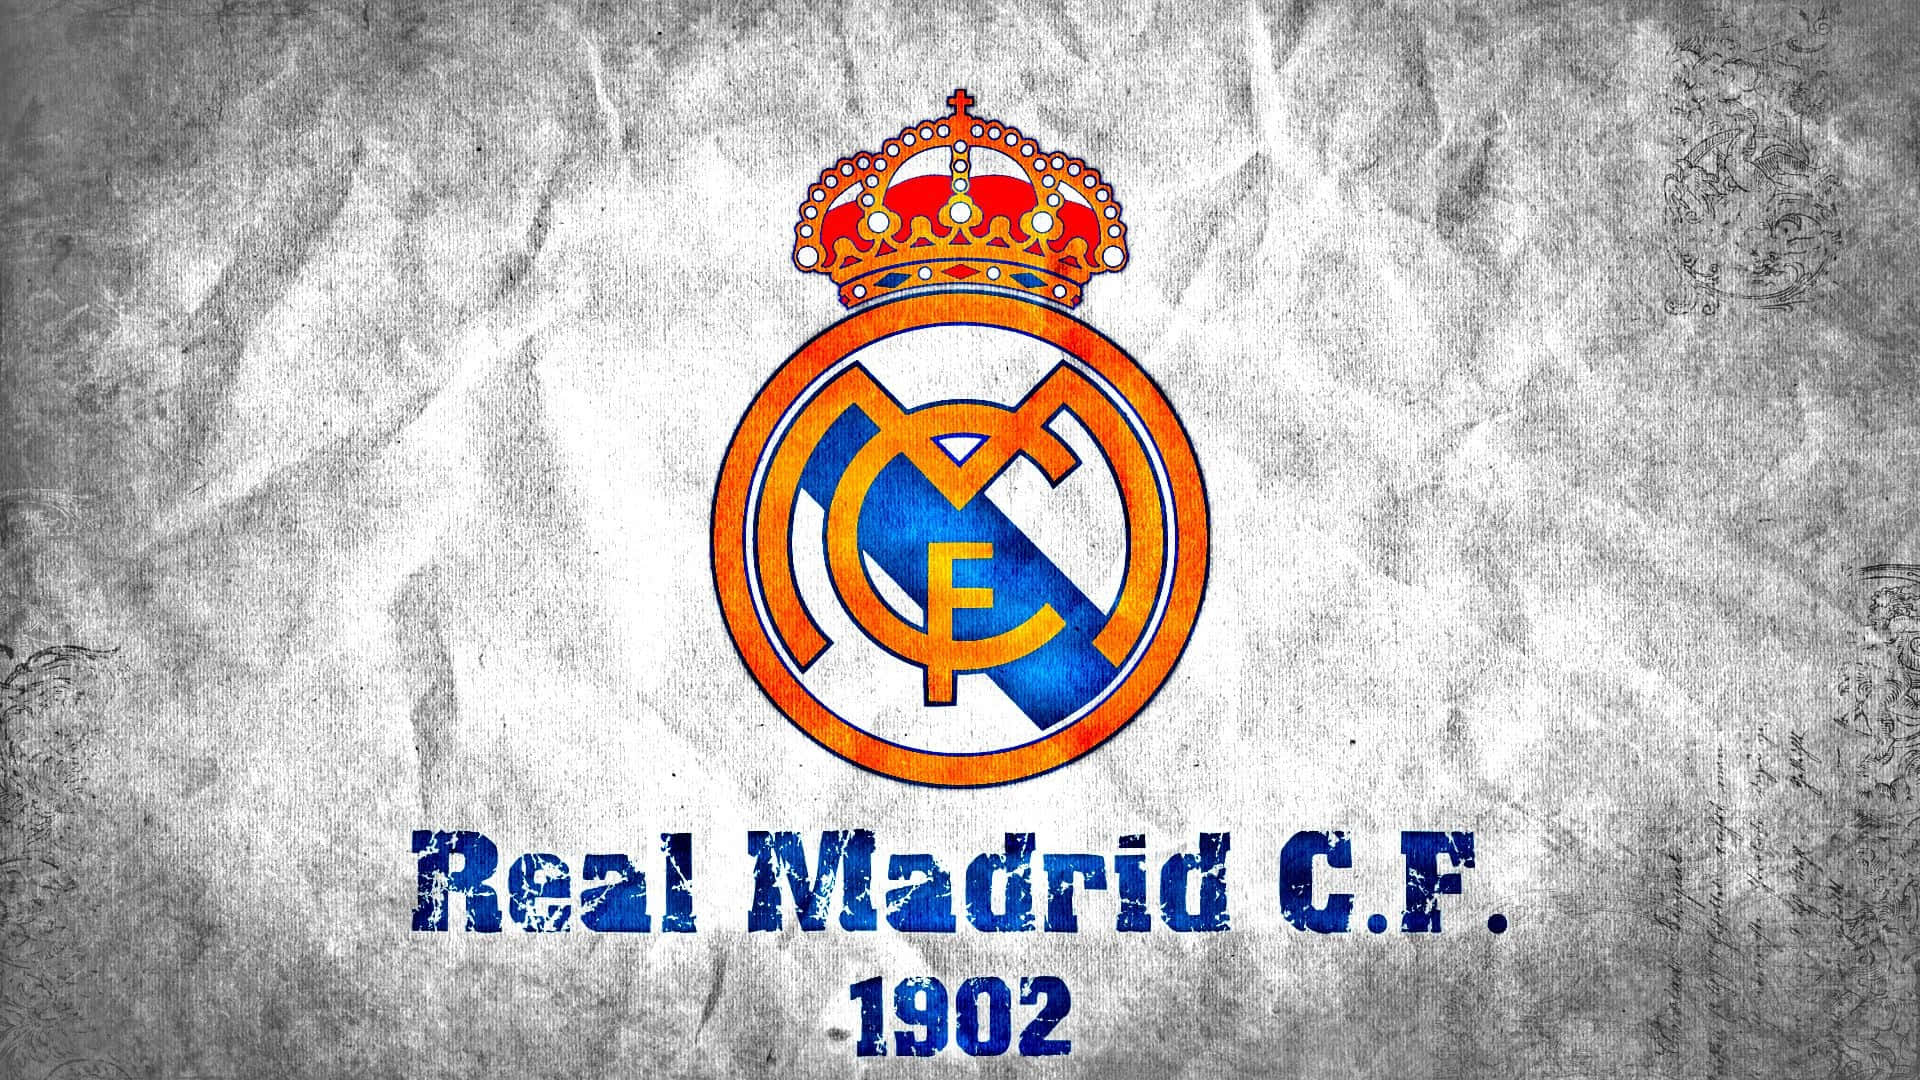 Be a part of Real Madrid's history